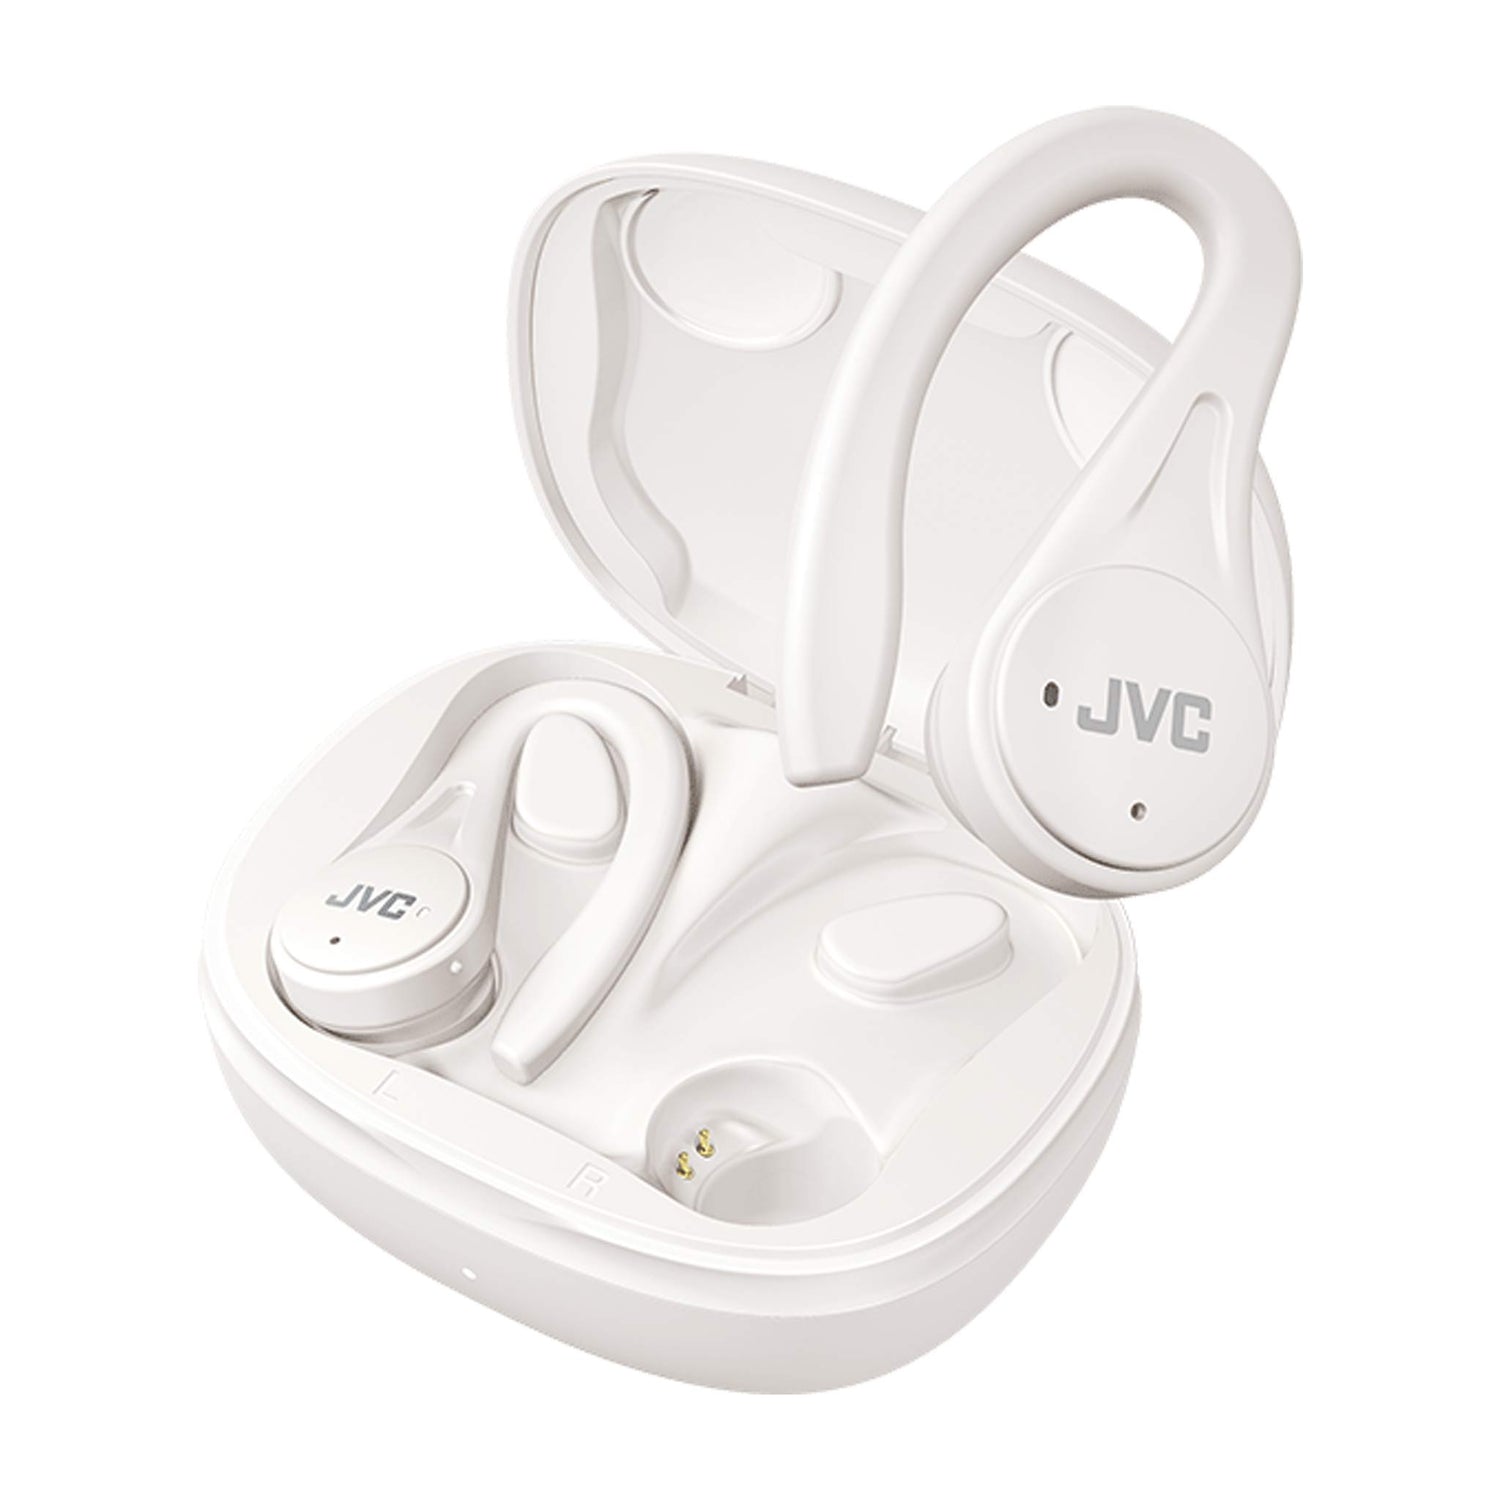 HA-EC25T in white charging case with one earbud out